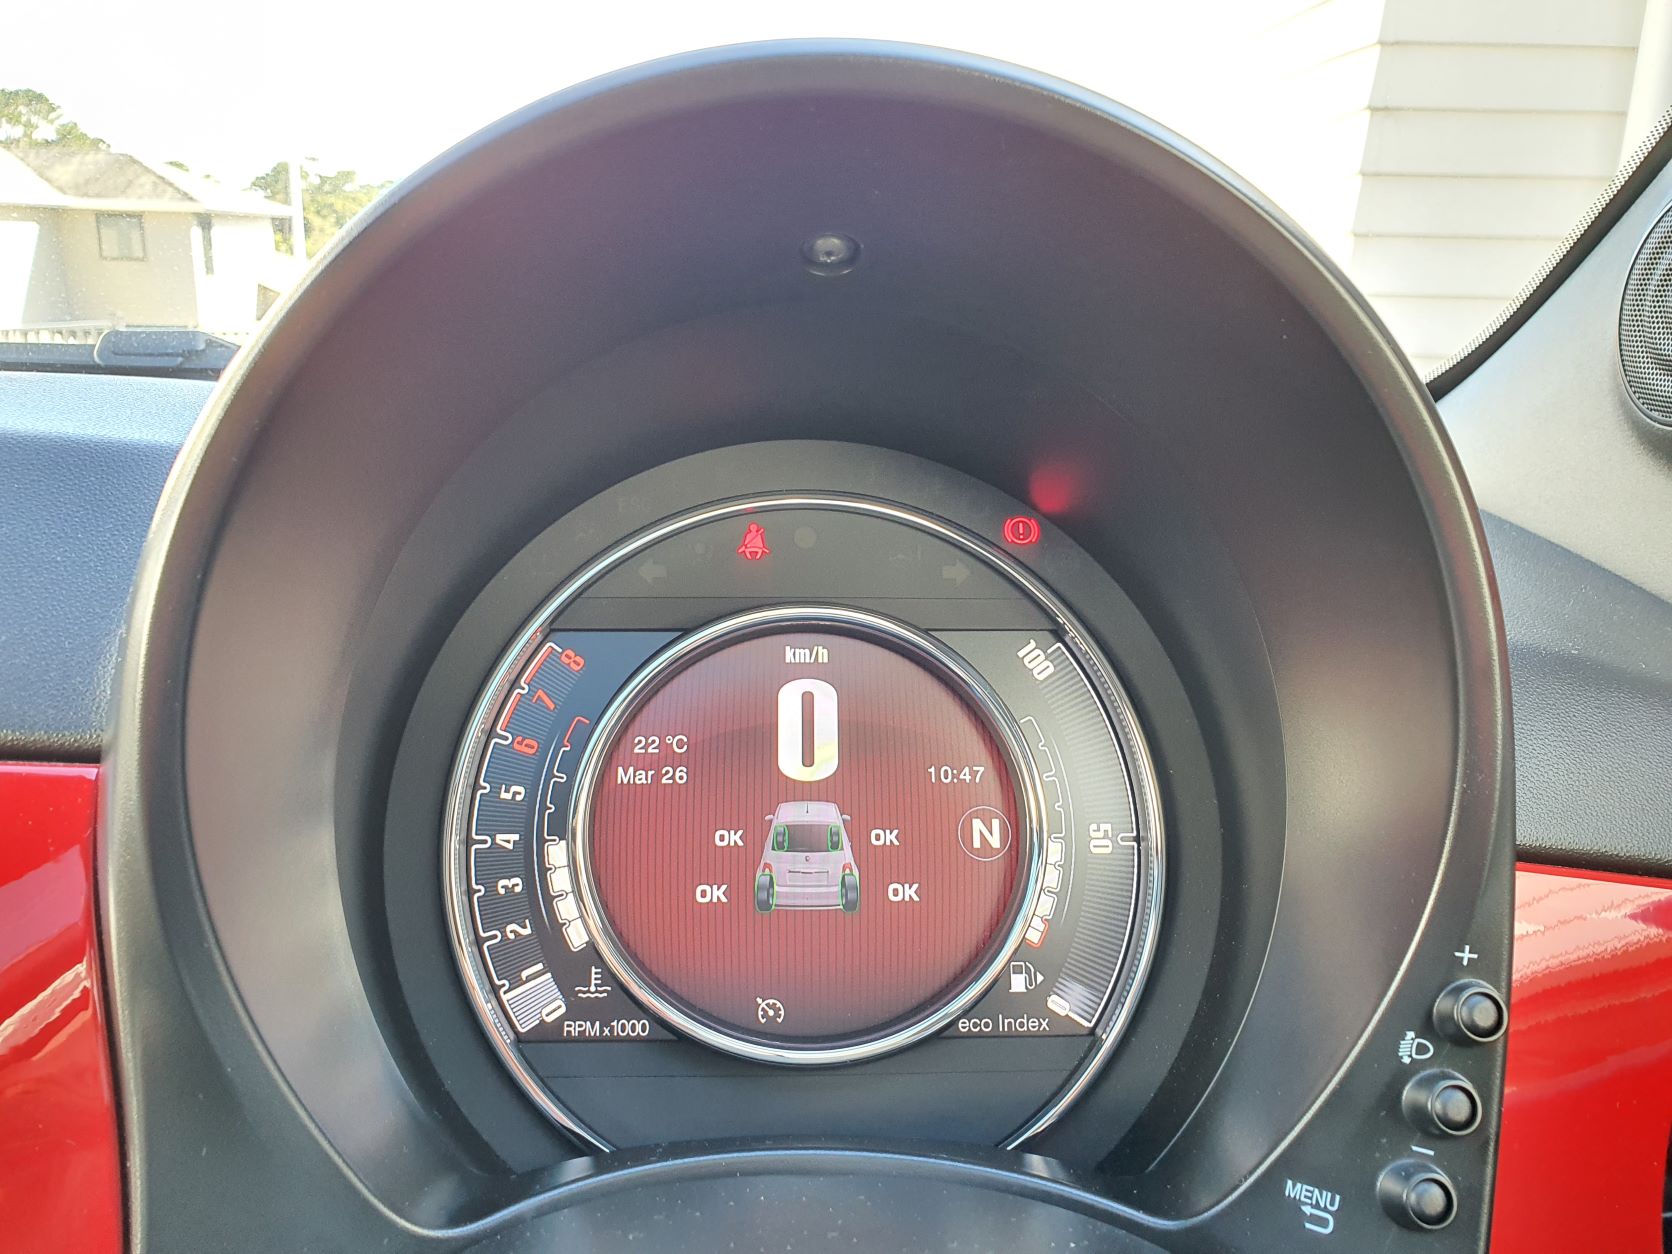 Gauge cluster on the new Fiat 500 Dolcevita